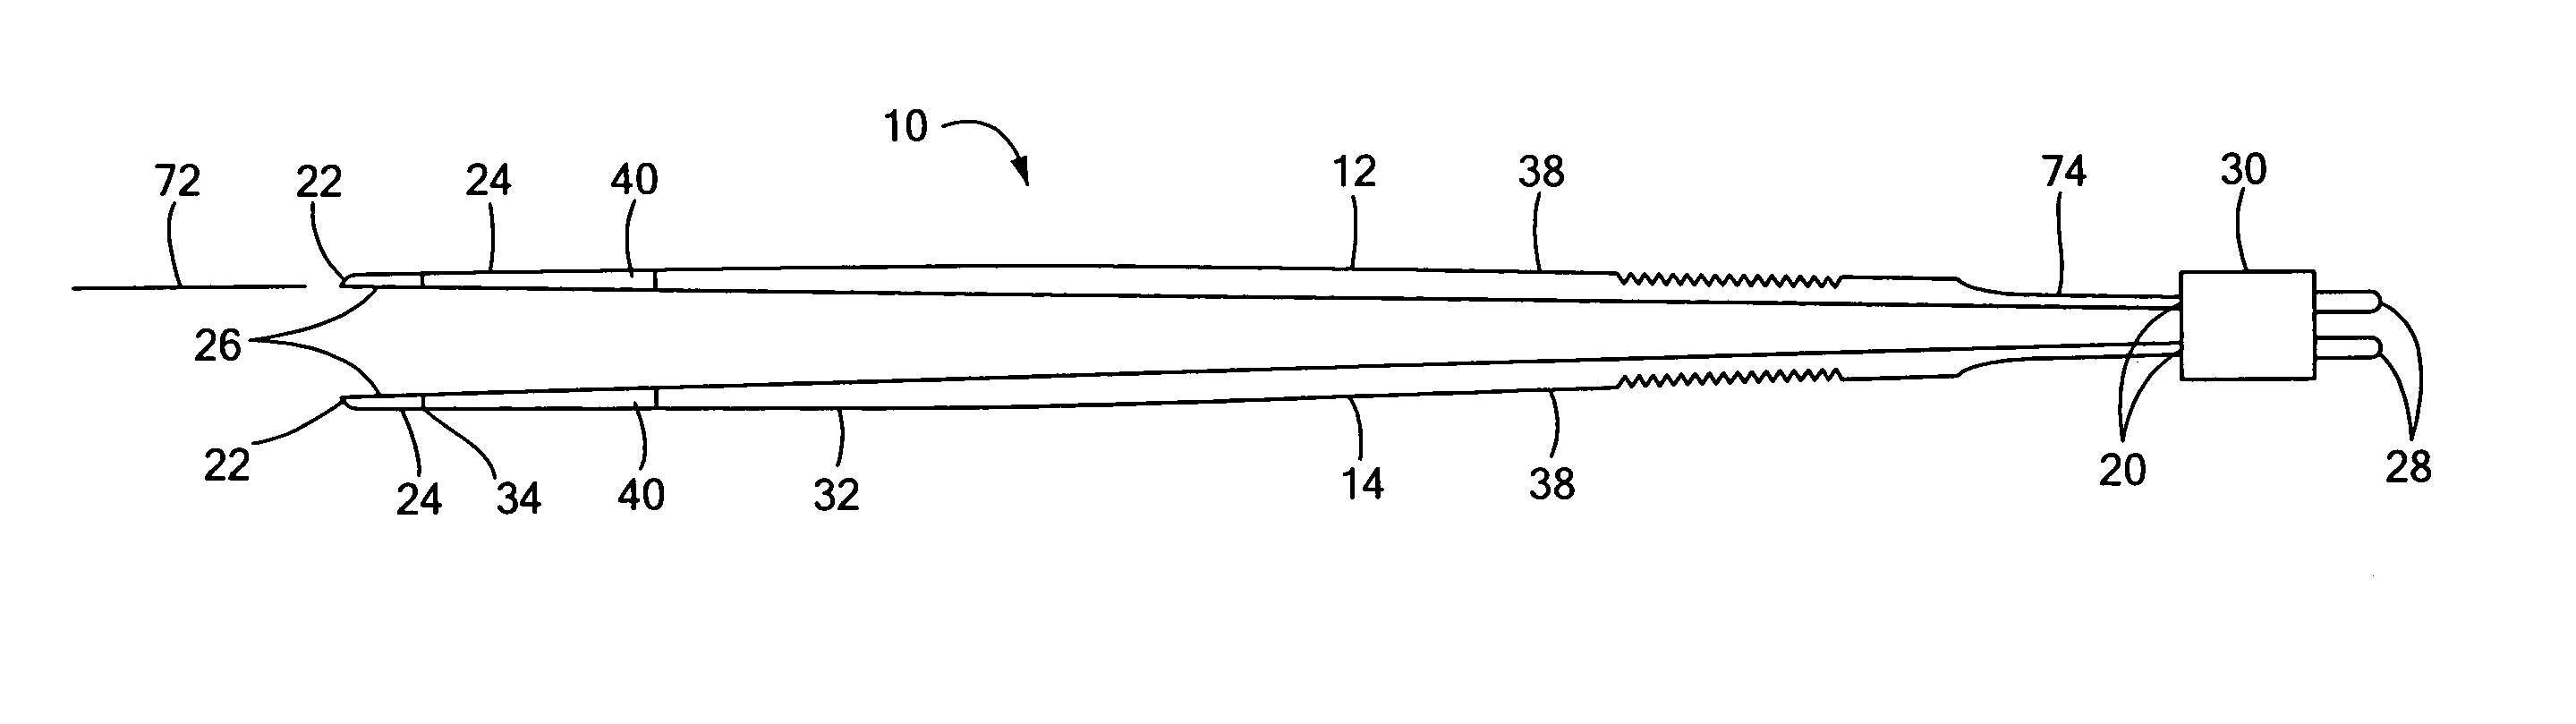 Electrosurgical forceps with composite material tips